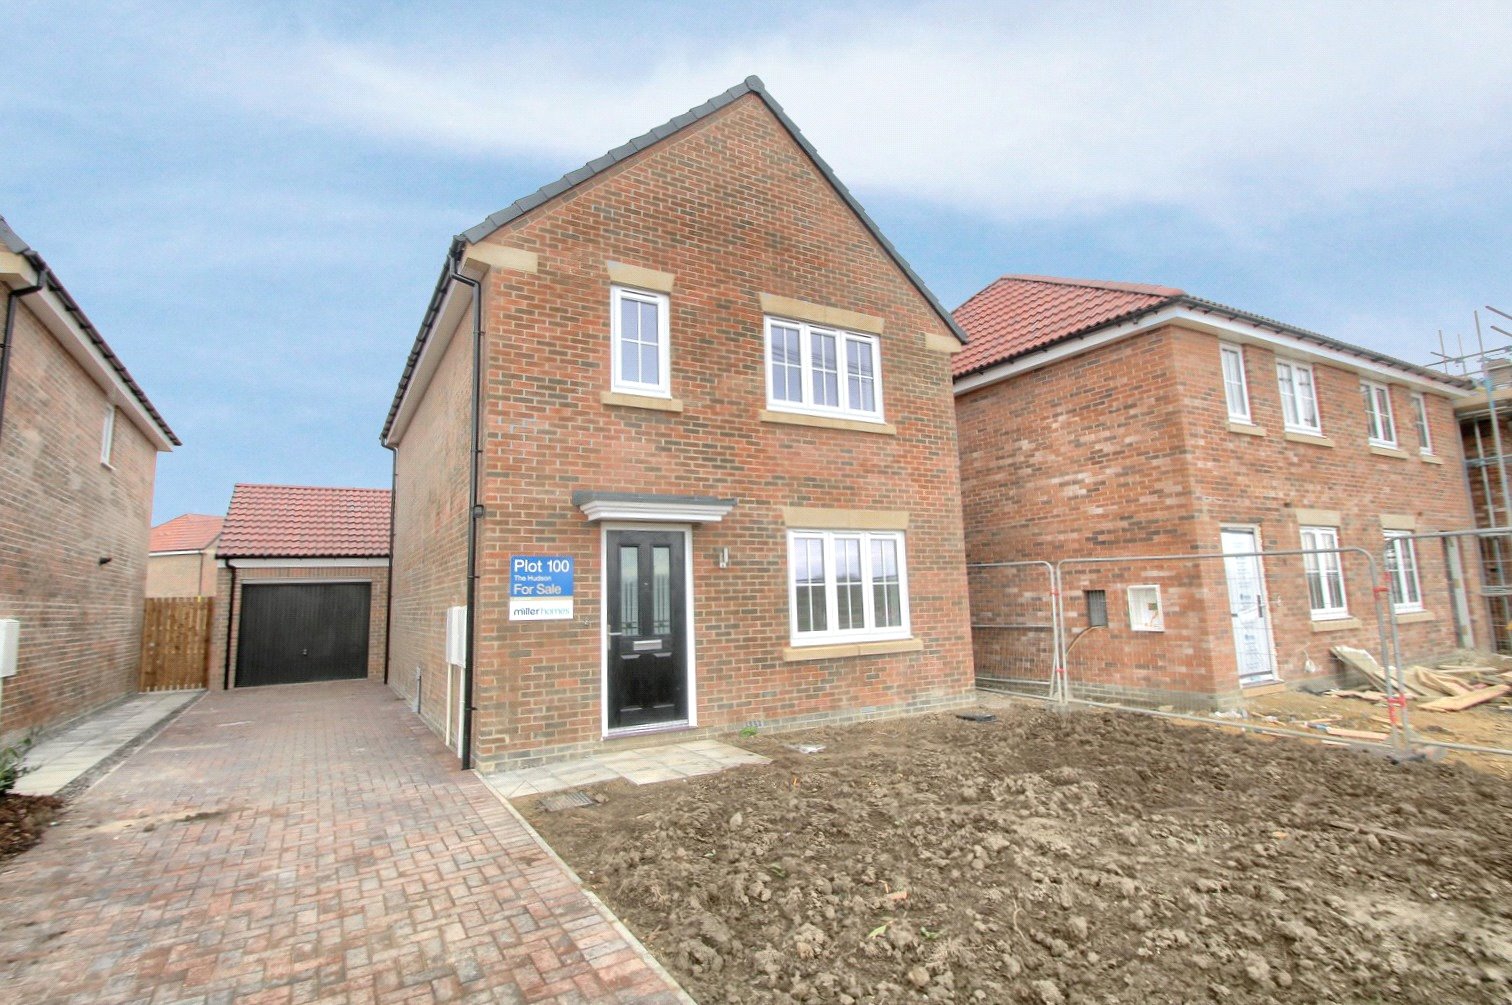 3 bed house for sale in Pearwood Gardens, Eaglescliffe 1